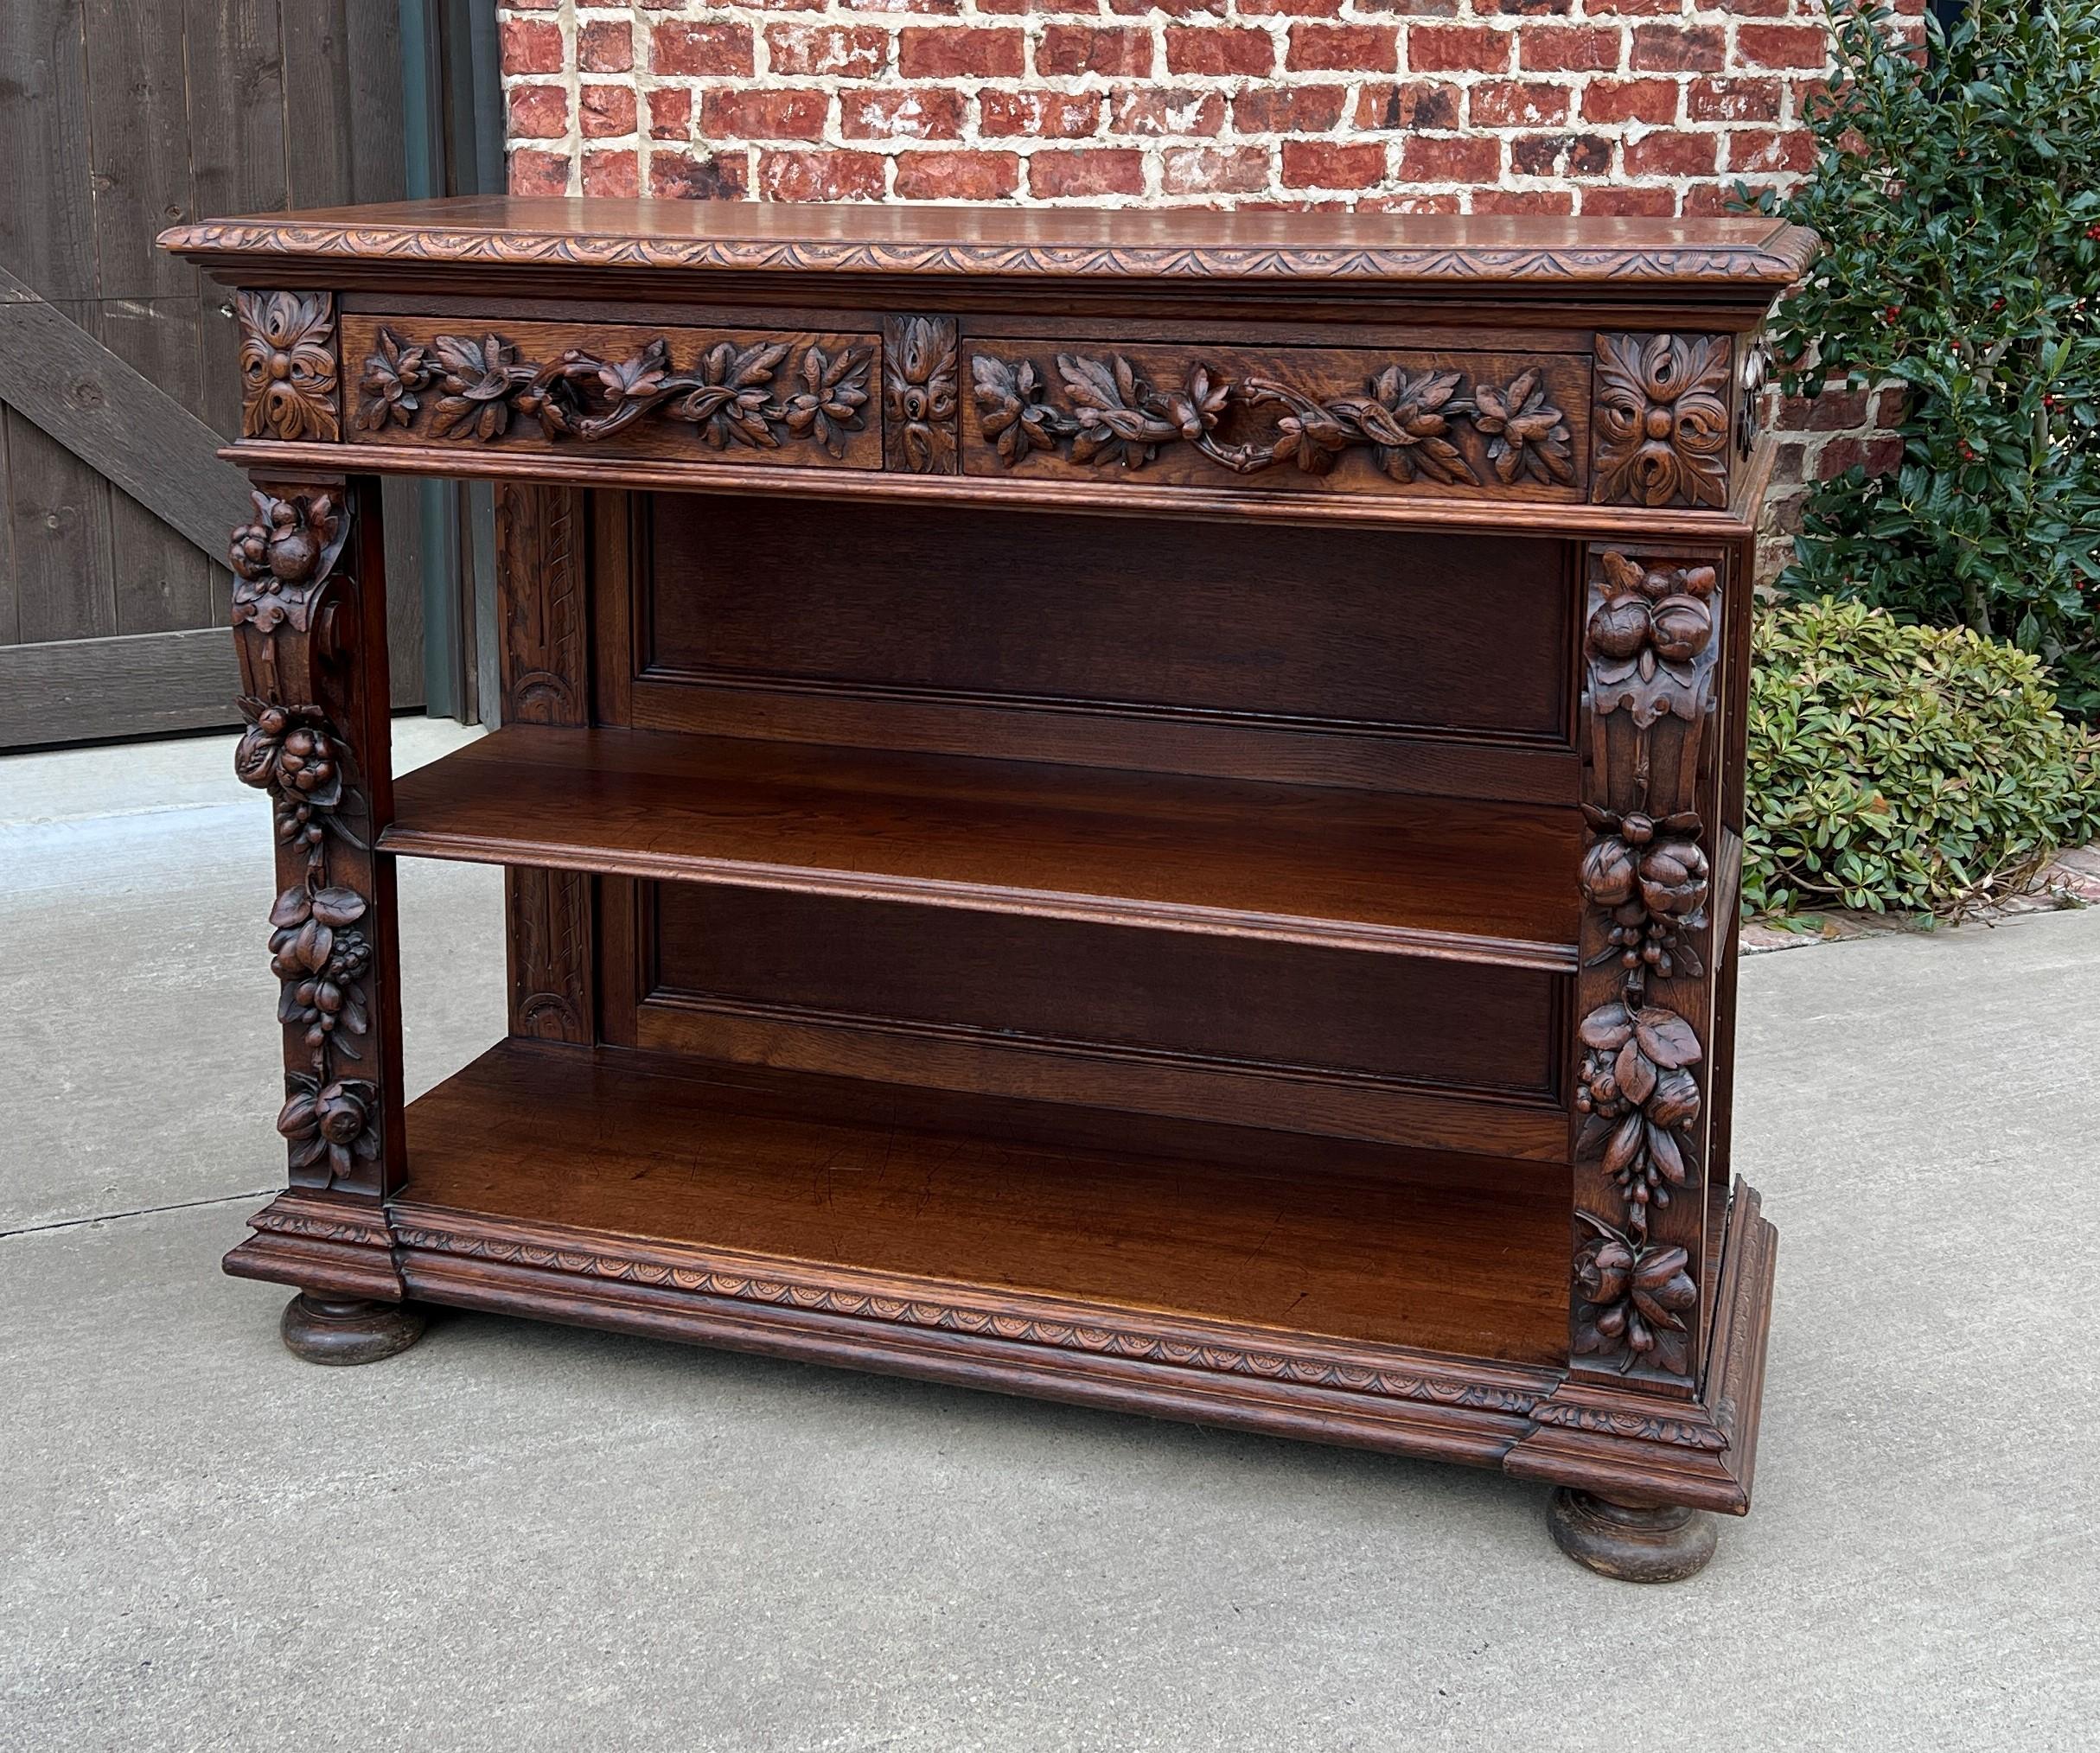 Exquisite antique French highly carved oak 3-tier console, sofa table or sideboard / server~~c. 1880s.

Highly carved antique French Renaissance Revival oak console, sofa table, sideboard or server~~excellent vine carved pulls and double